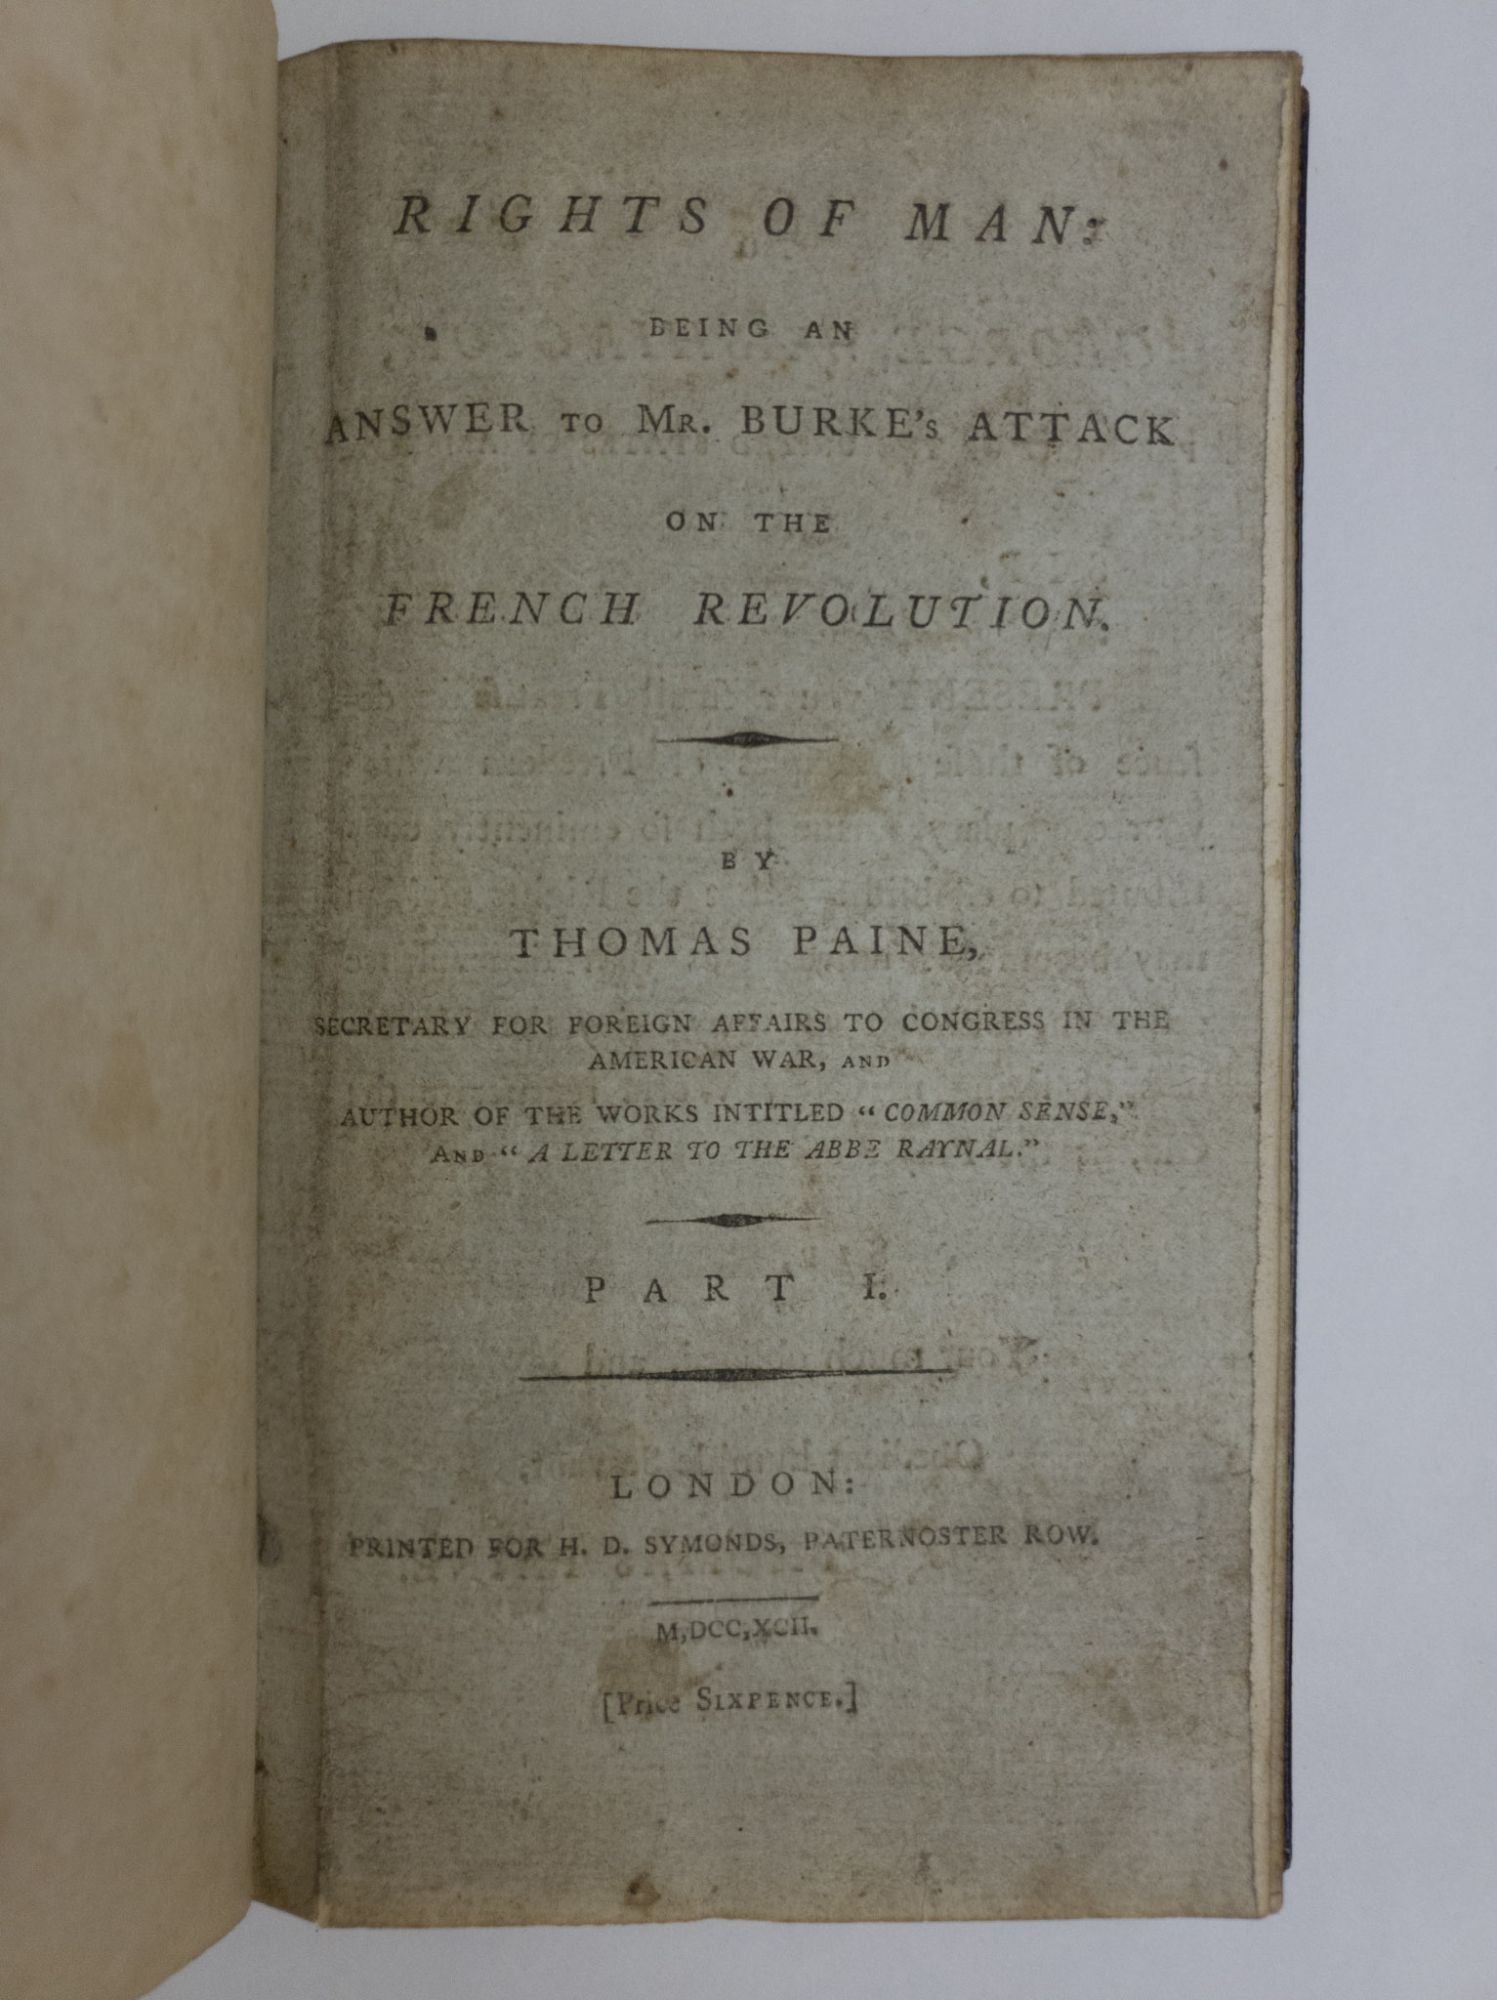 Product Image for RIGHTS OF MAN; [Bound with] RIGHTS OF MAN PART THE SECOND; [Bound with] A LETTER ADDRESSED TO THE ABBE RAYNAL; [With] AN 1815 HORSE SHOW ADVERTISEMENT